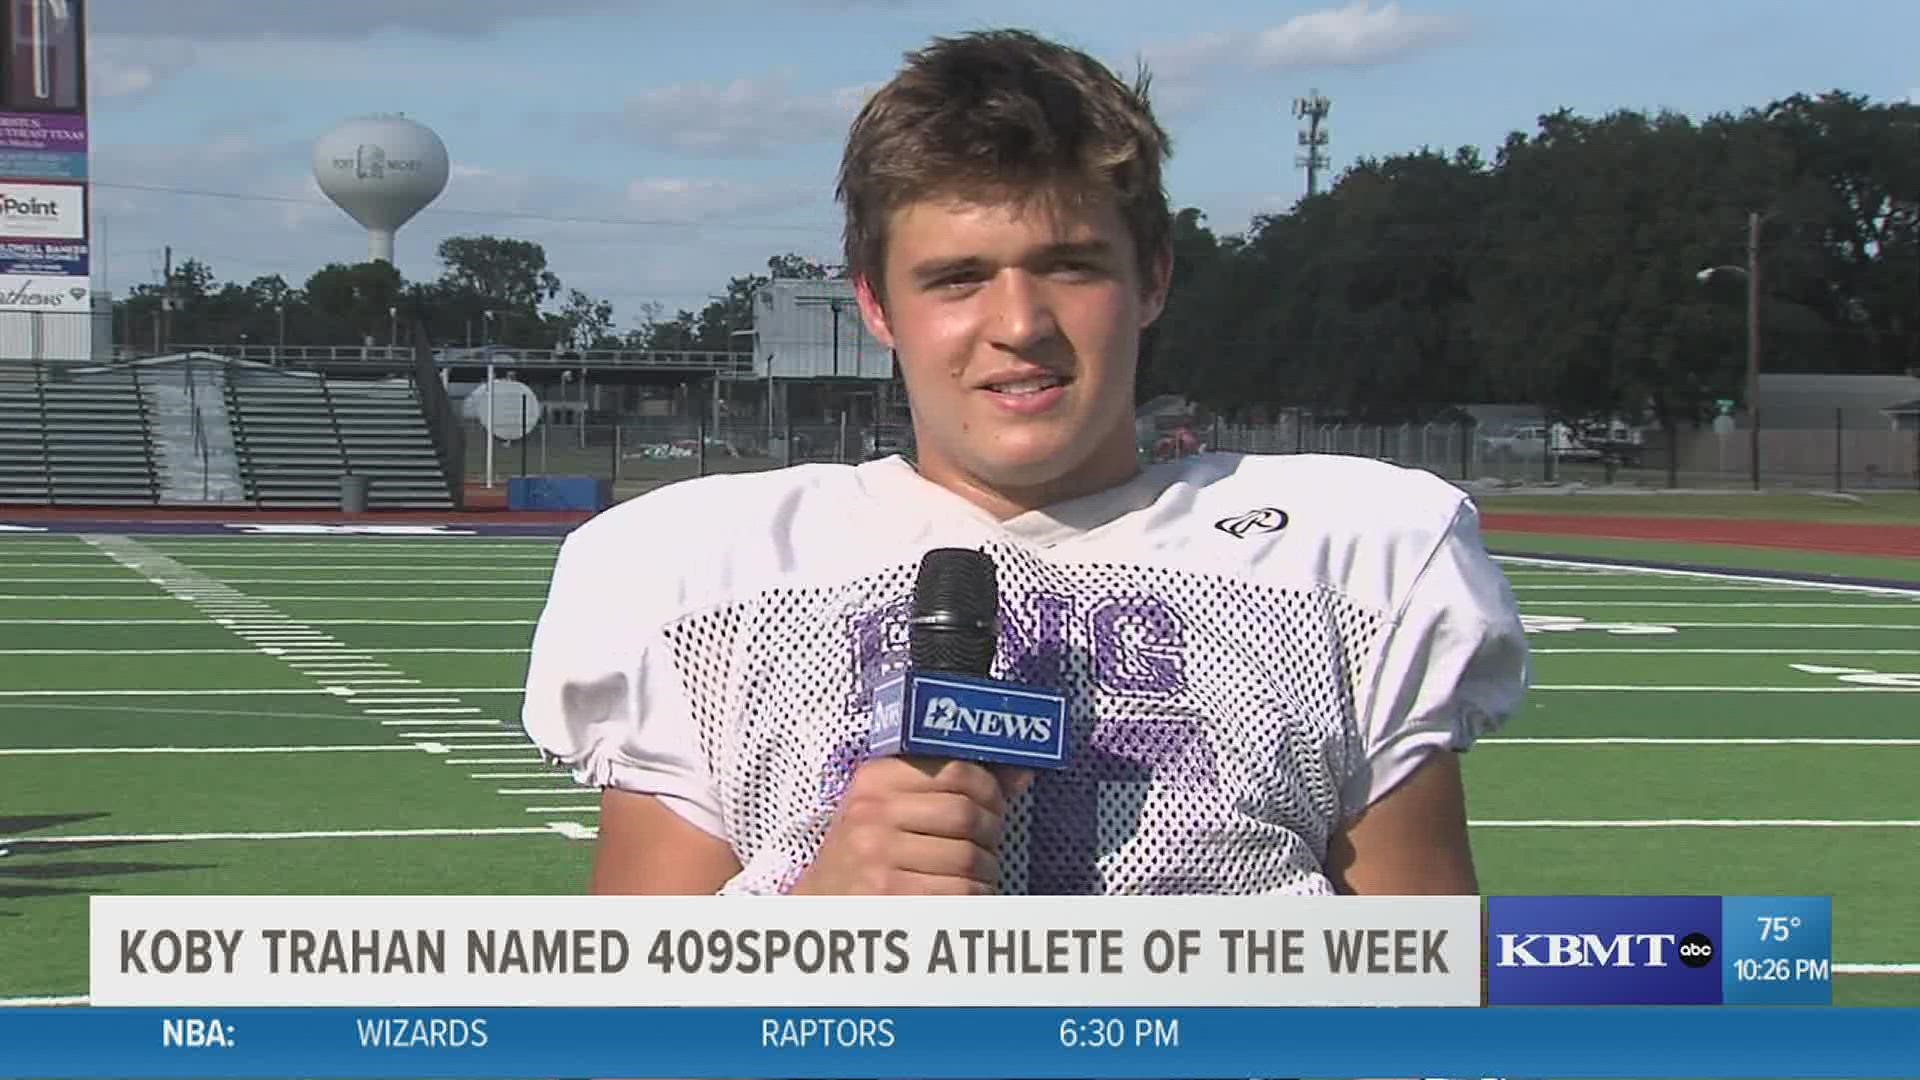 Trahan named 409Sports Athlete of The Week after shattering school record